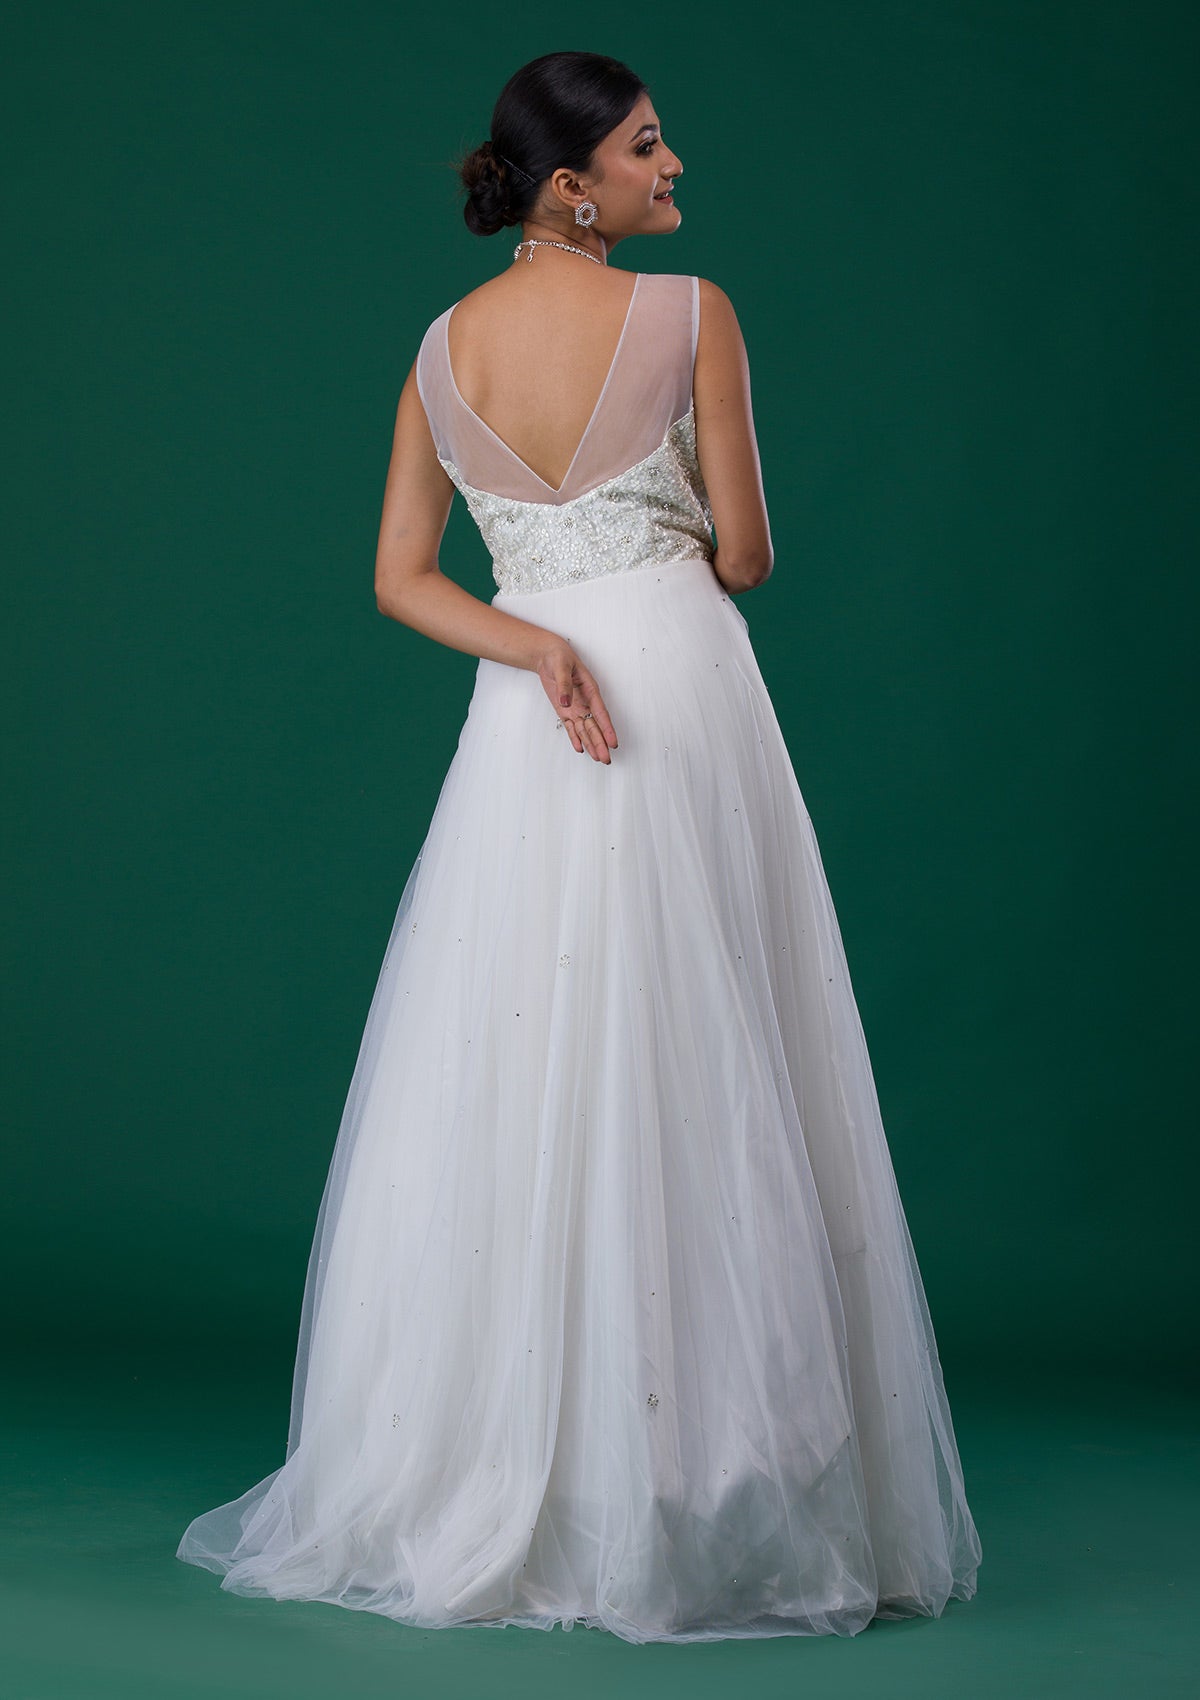 Romantic Off-the-Shoulder Long Sleeve Wedding Dress with Plunging Neckline